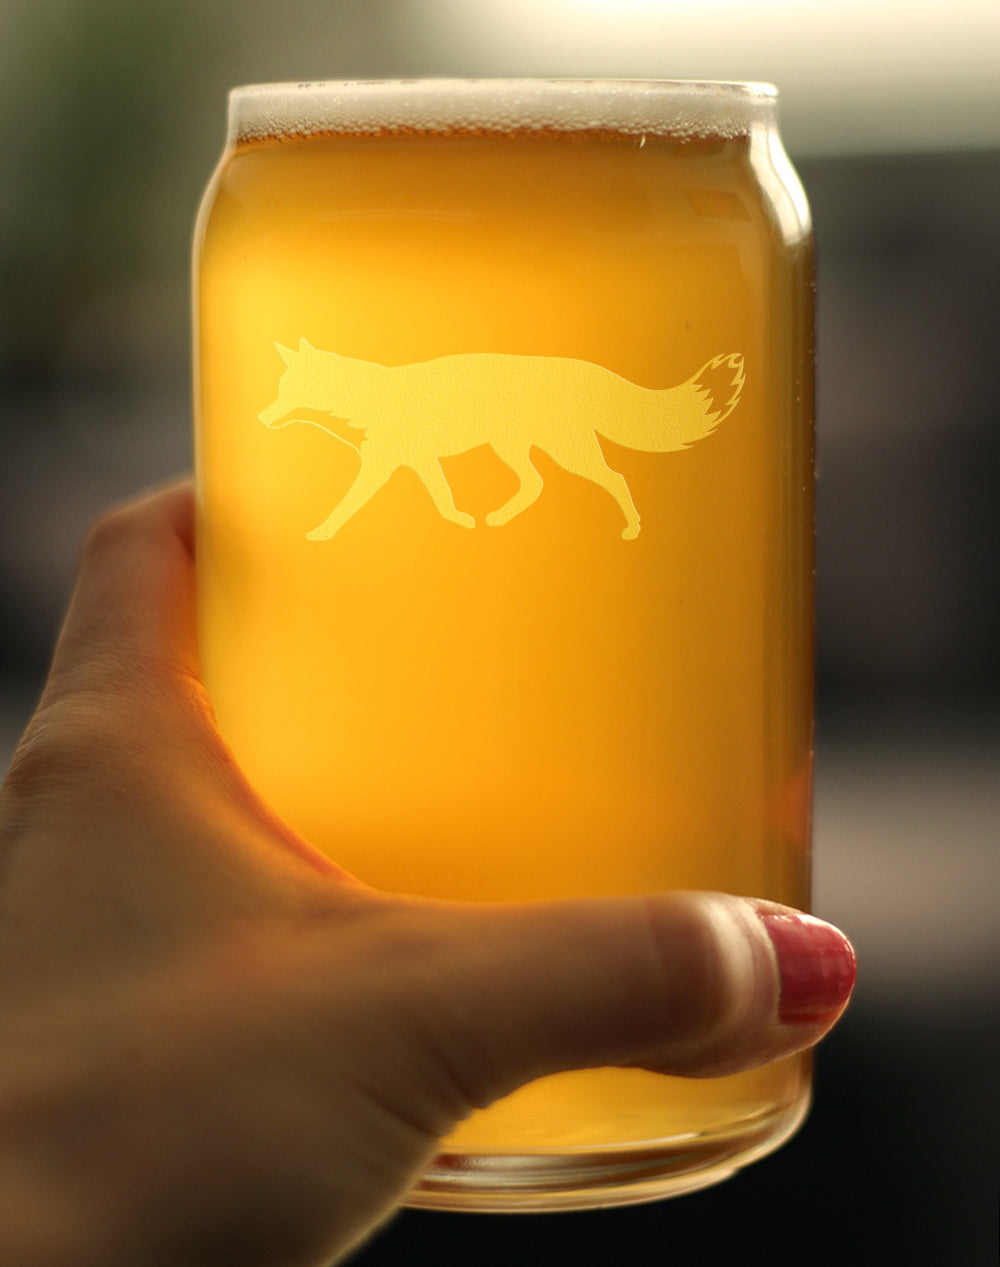 Fox Silhouette Beer Can Pint Glass - Cabin Themed Fox Gifts or Rustic Fox Decor for Women and Men - 16 Oz Glasses